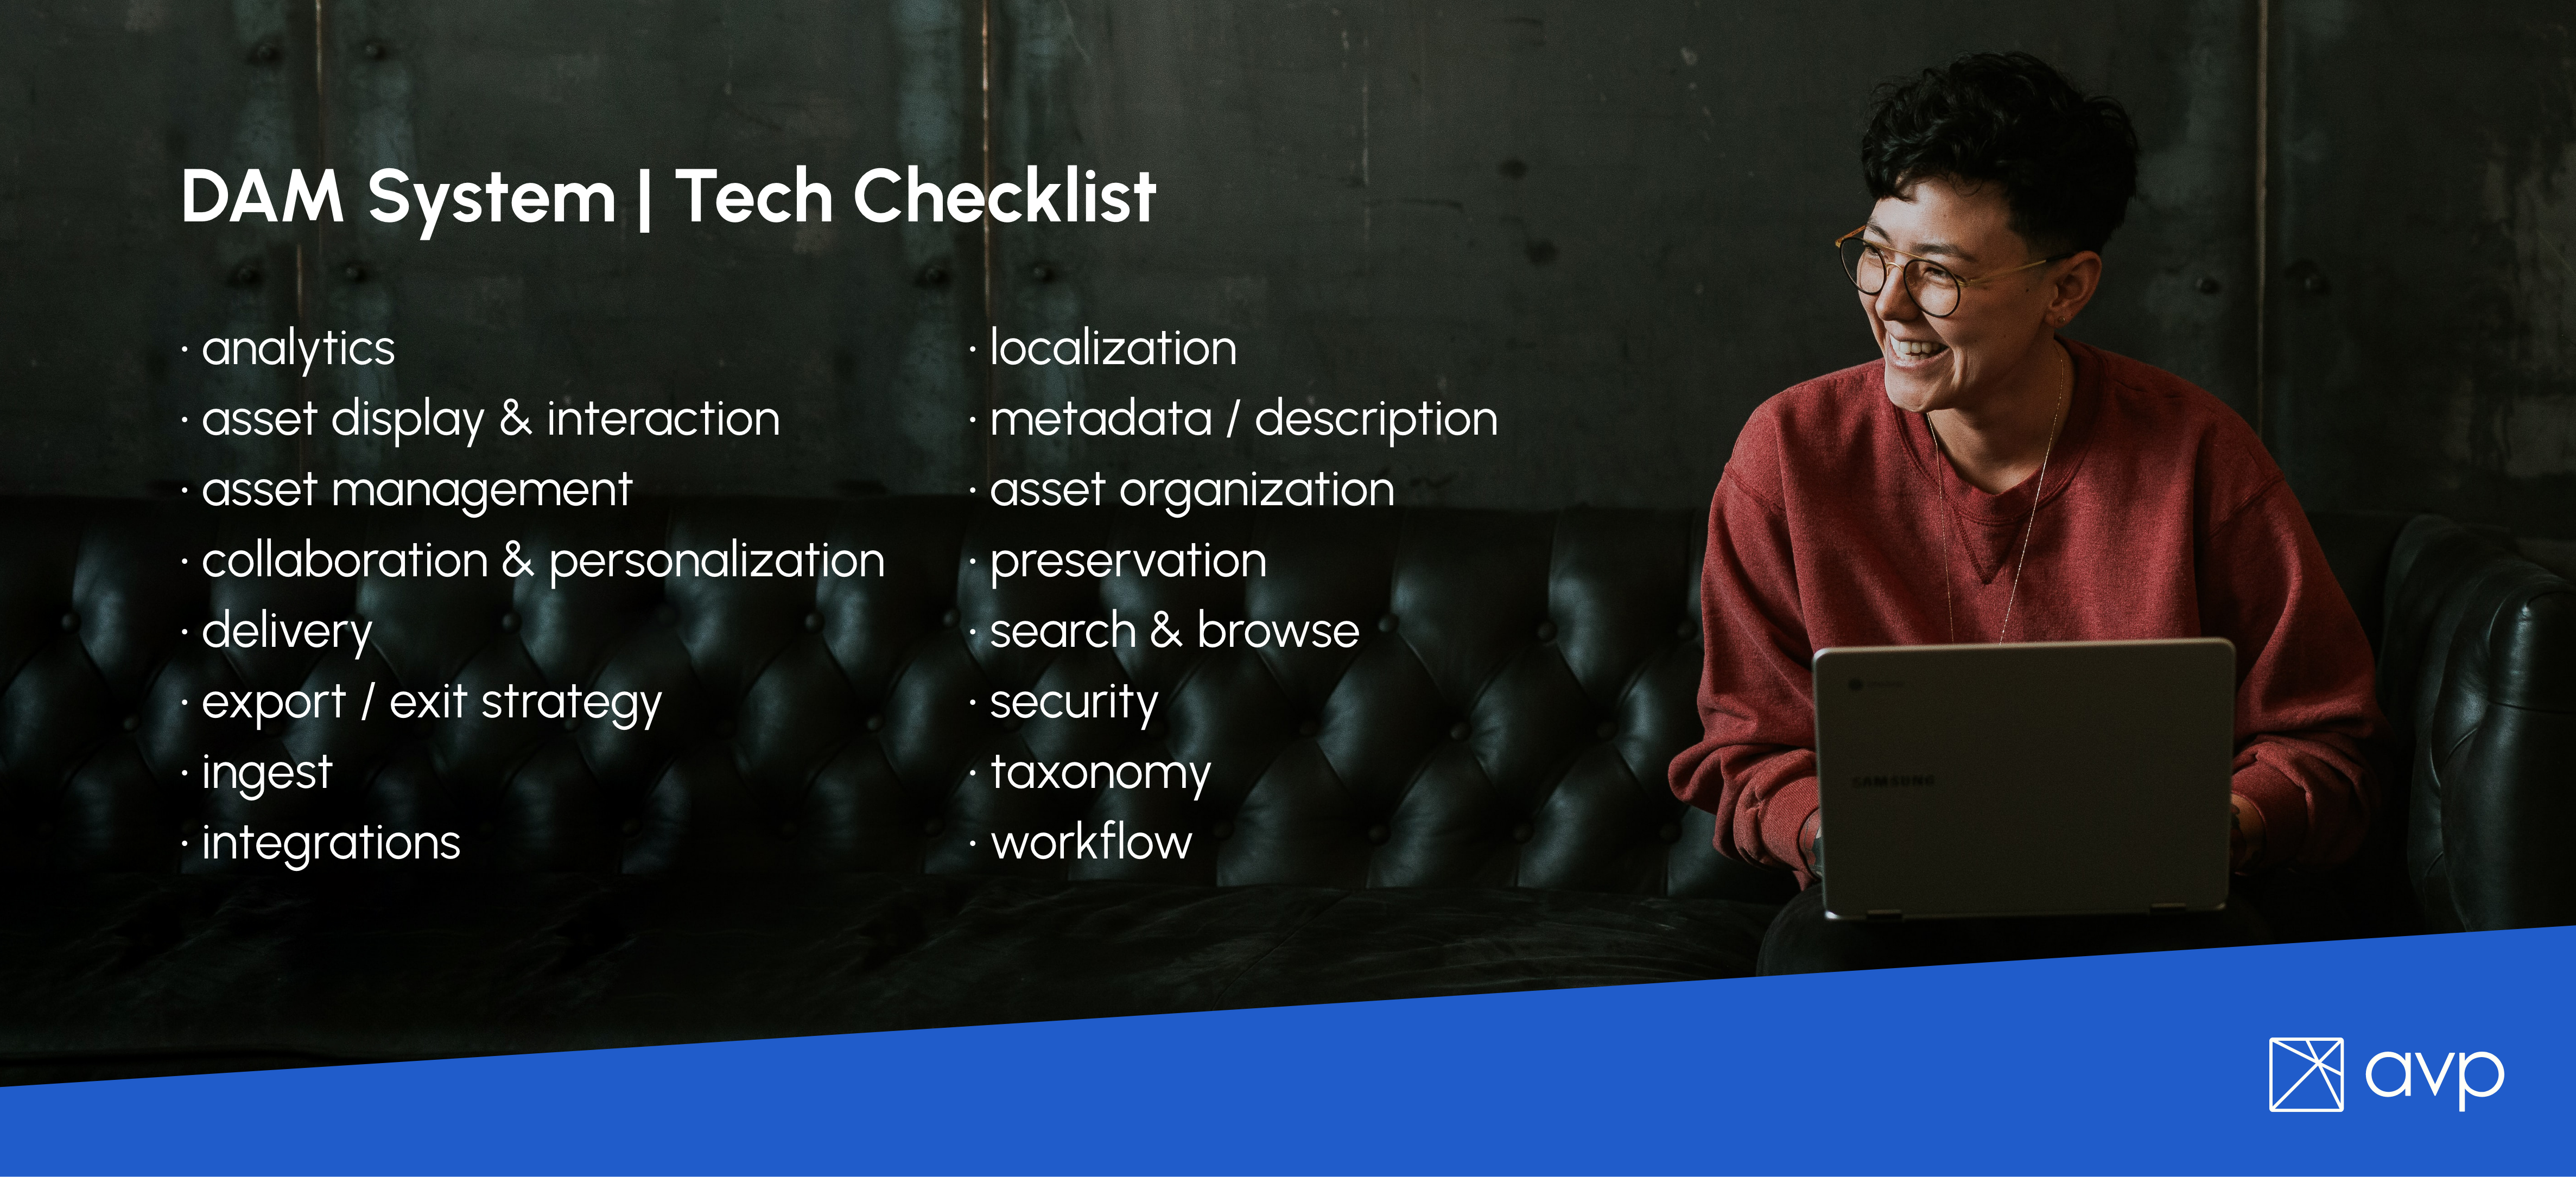 Dam System | Tech Checklist
-analytics
-asset display & interaction
-asset management
-collaboration & personalization
-delivery
-export / exit strategy
-ingest
-integrations
-localization
-metadata / description
-asset organization
-preservation
-search & browse
-security
-taxonomy
-workflow